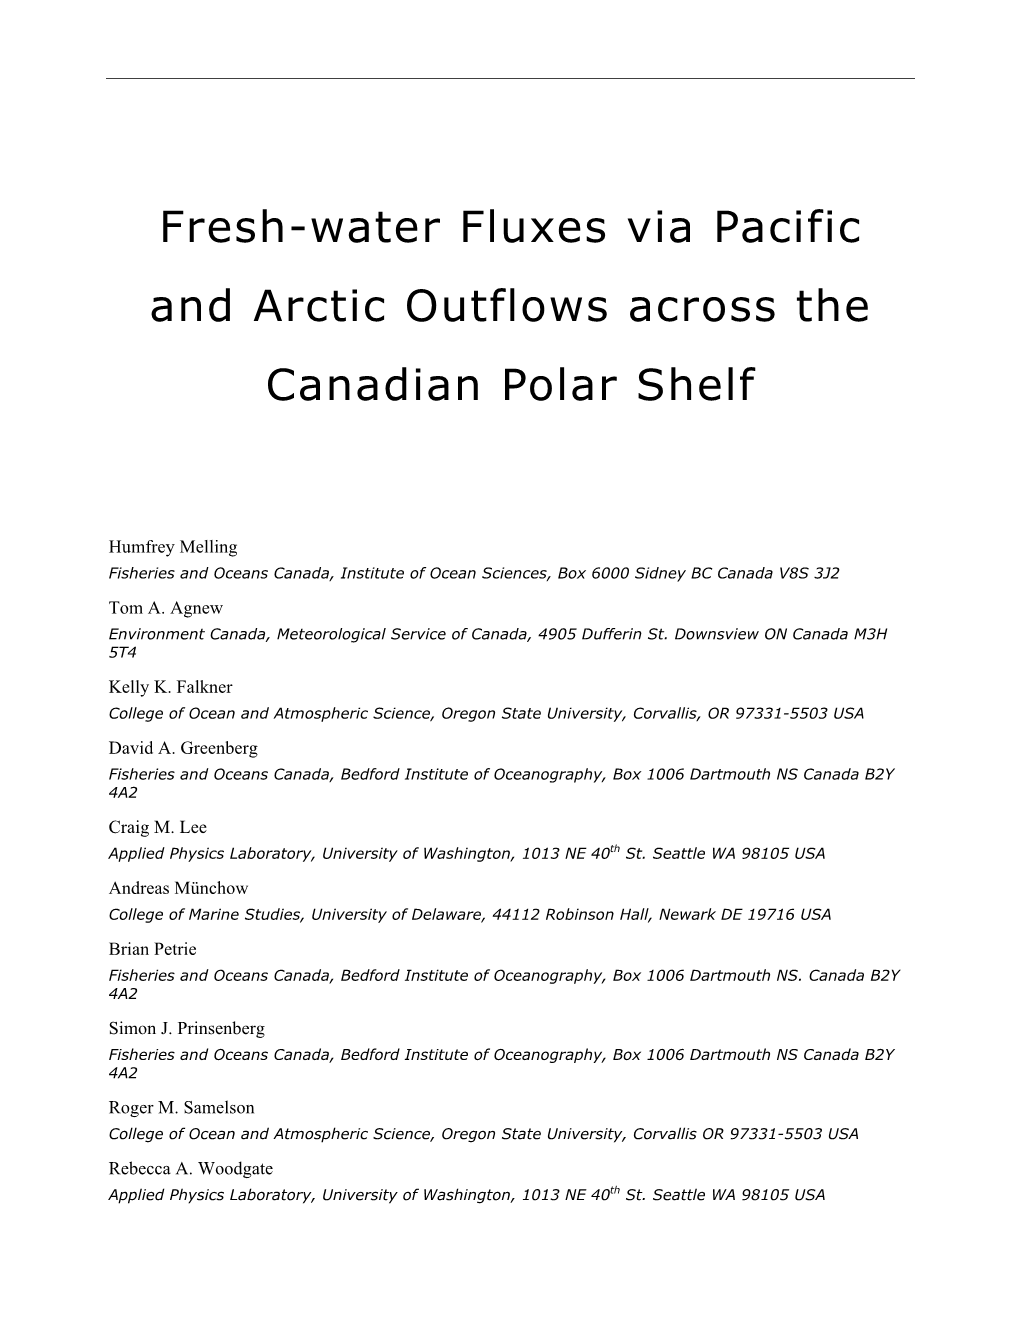 Fresh-Water Fluxes Via Pacific and Arctic Outflows Across the Canadian Polar Shelf